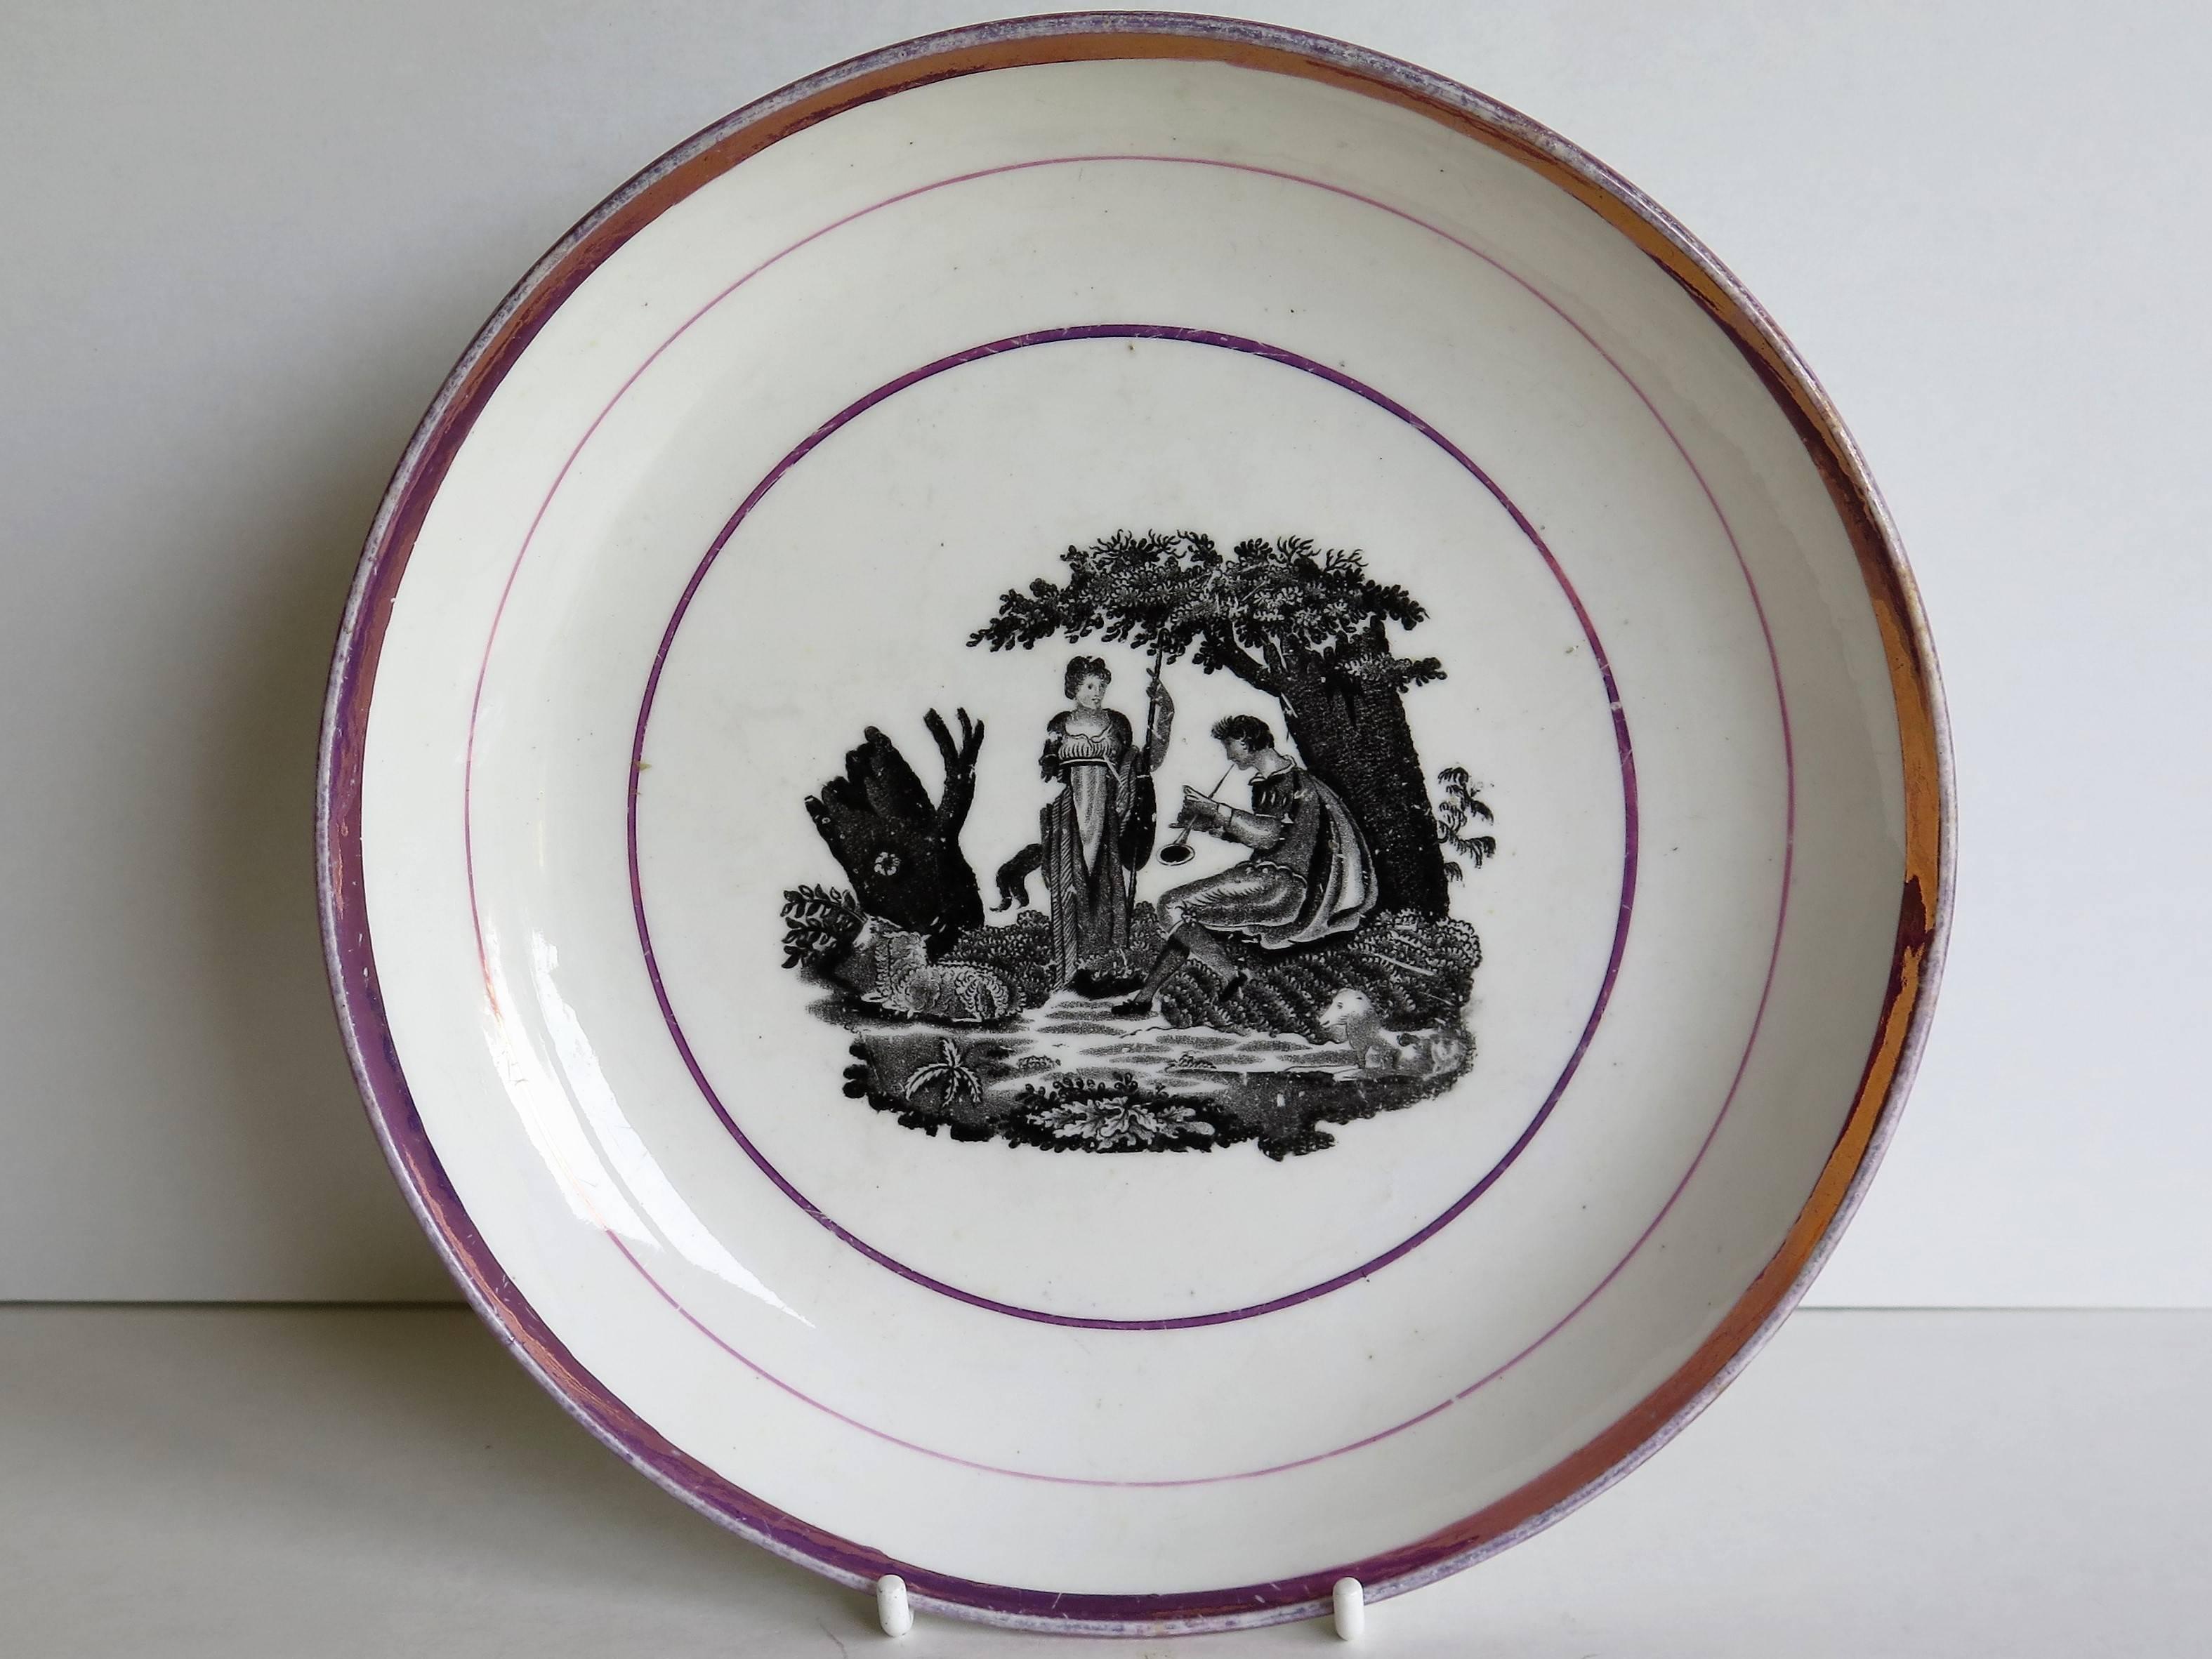 This is a good porcelain Sunderland pink lustre dish or deep plate from very early in the 19th century, George III period, circa 1810.

The dish is decorated with a classical bat printed scene of a lady in a woodland setting being serenaded by a man